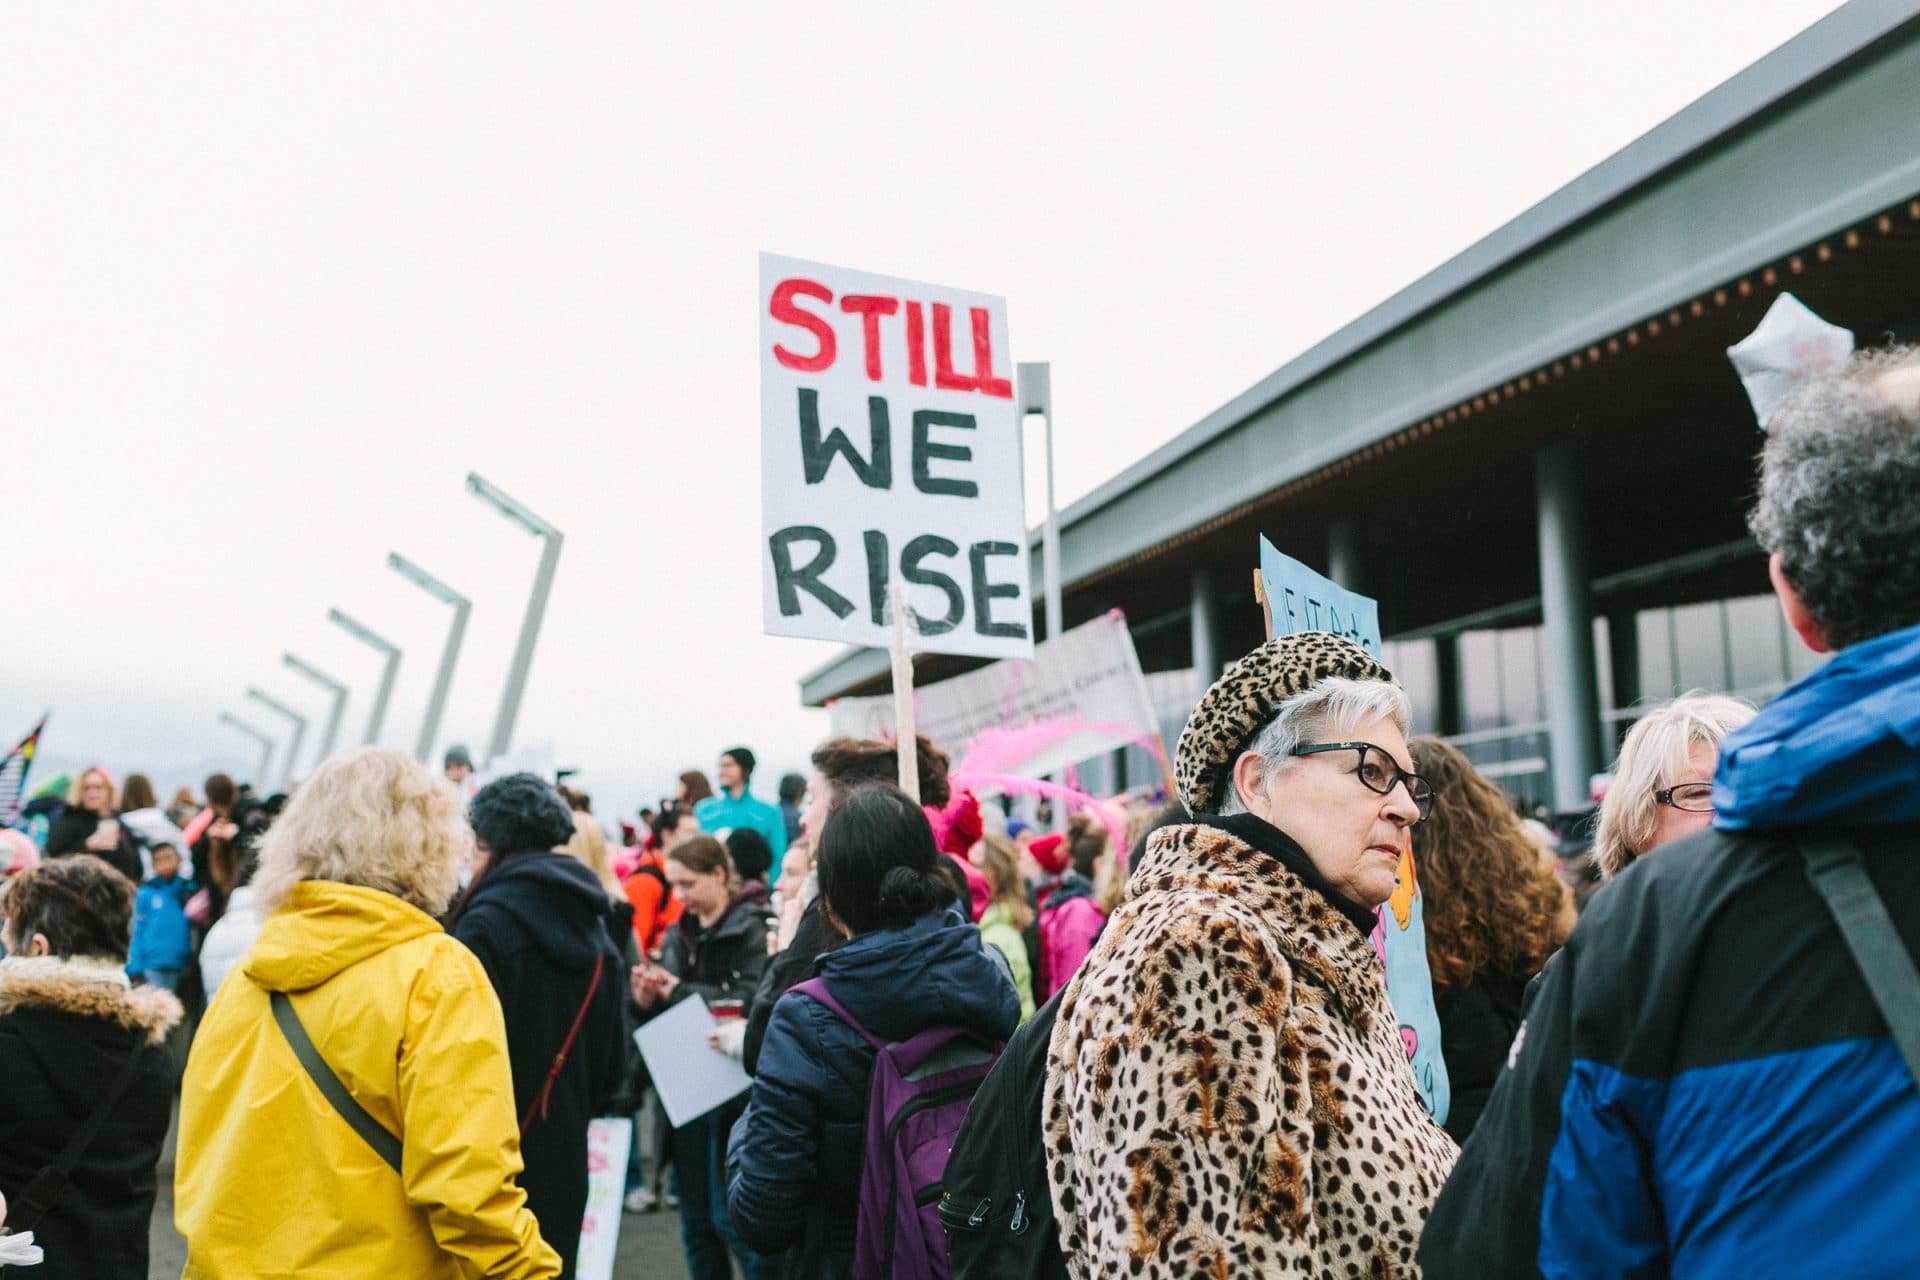 Amid a crowd at a protest march a woman holds a sign labelled "Still We Rise!" showing how individuals may demand subsidiarity from the government